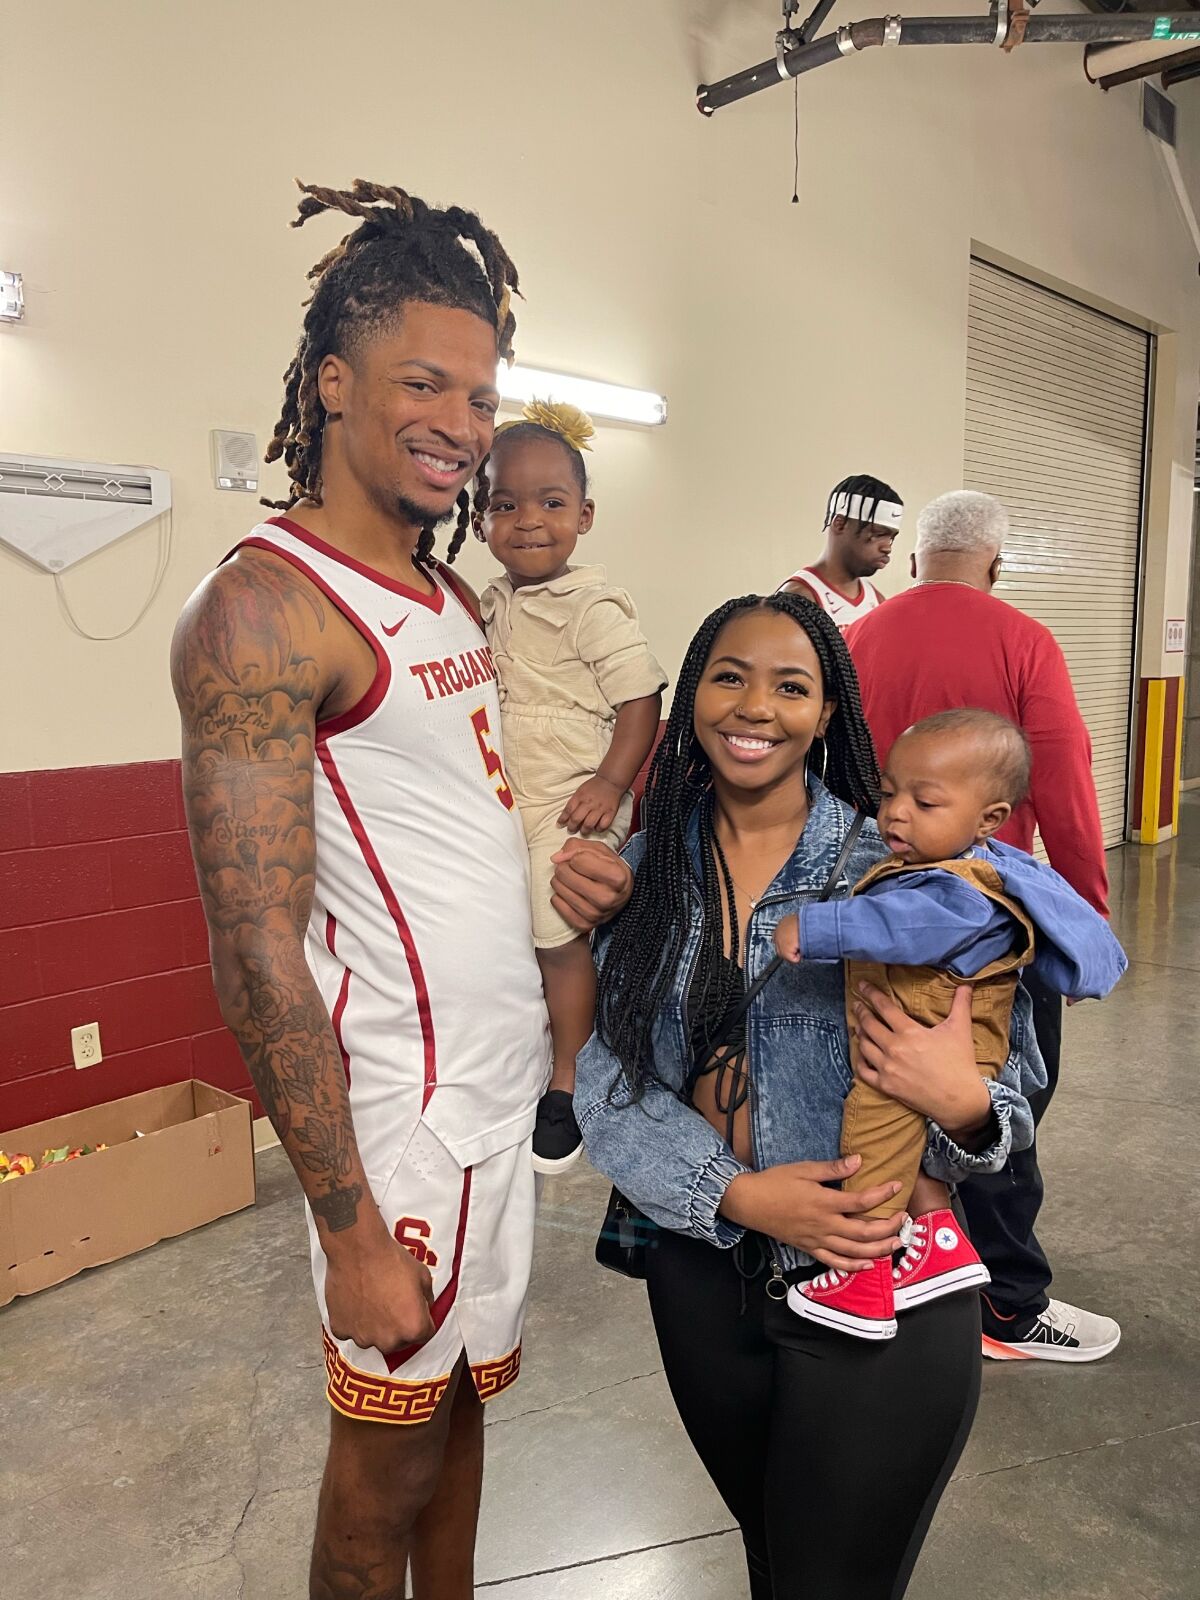 Isaiah White holds his daughter, Amari, while posing for a family photo with his wife, Jazmine, and son, Xavier.